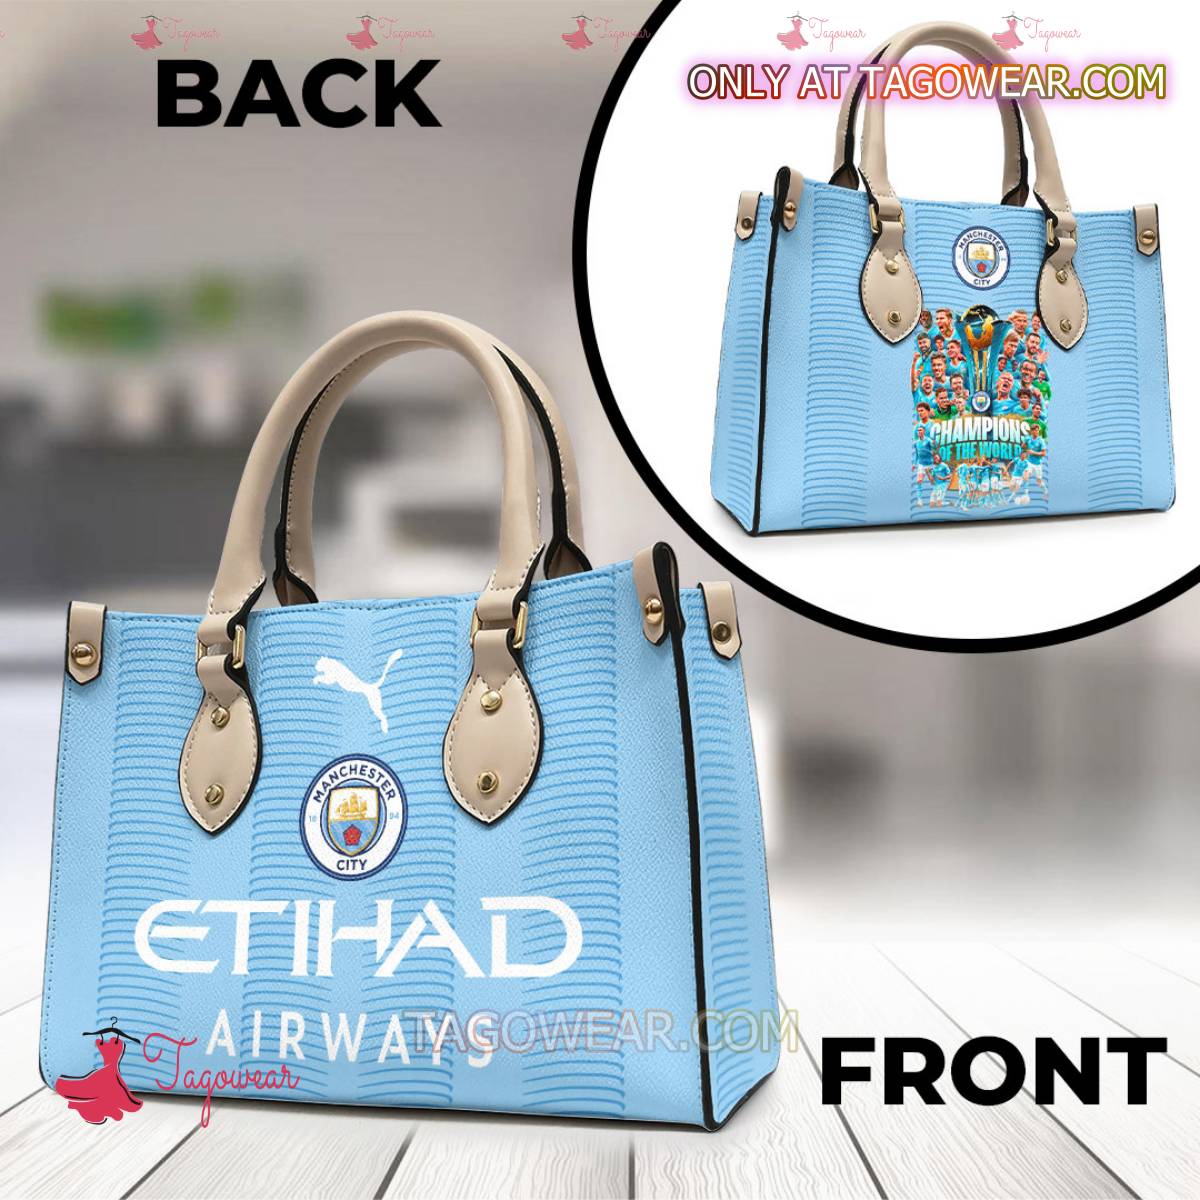 Manchester City Champion Of The World Leather Handbag a